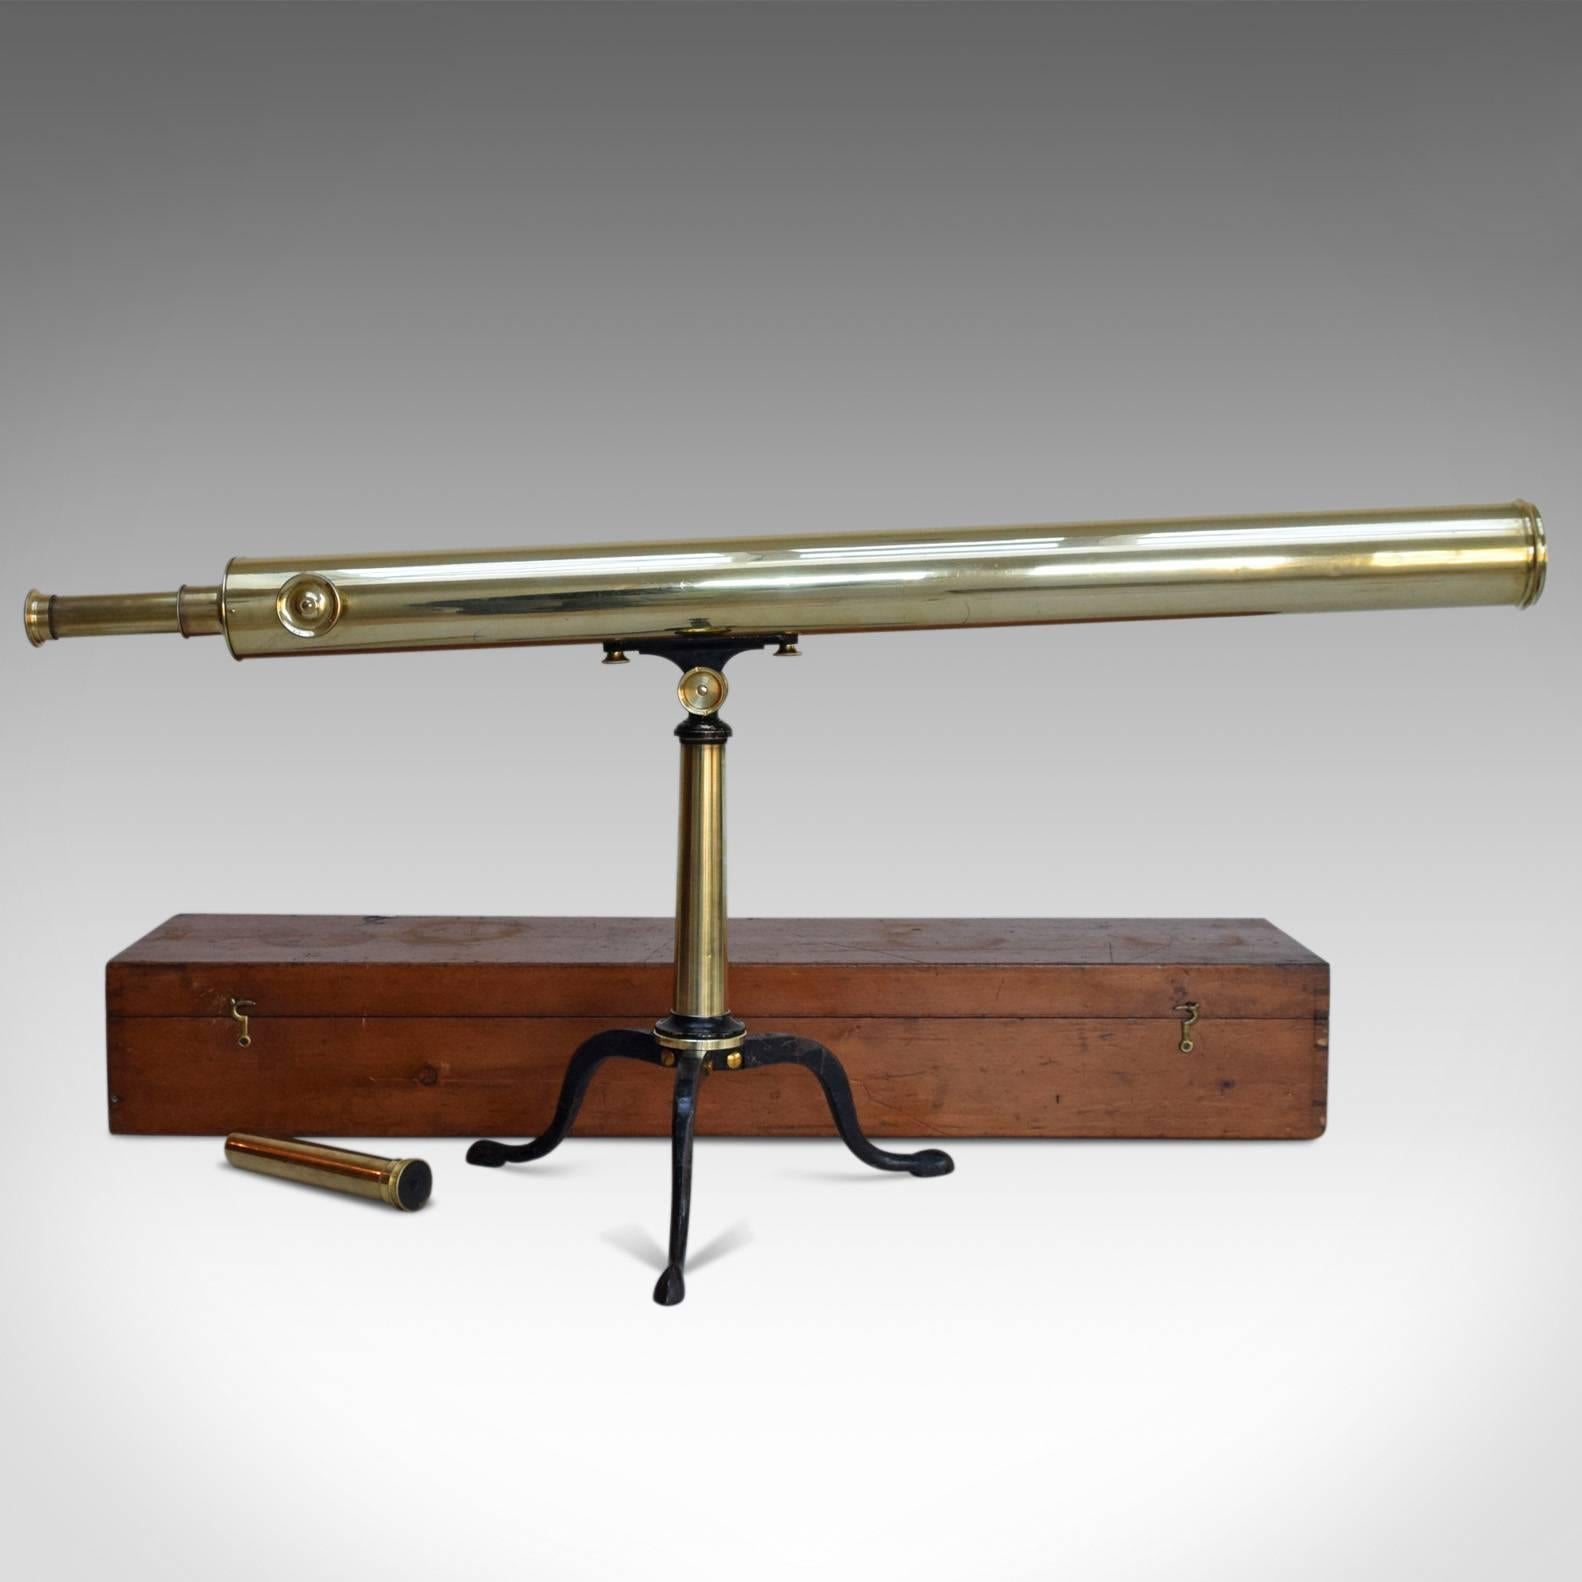 This is an antique library telescope for terrestrial or astronomical use. A Scottish piece from the renowned firm, E. Lennie and dating to circa 1880.

Larger than most presenting a clear, sharp optical performance
Parallel, brass, primary barrel